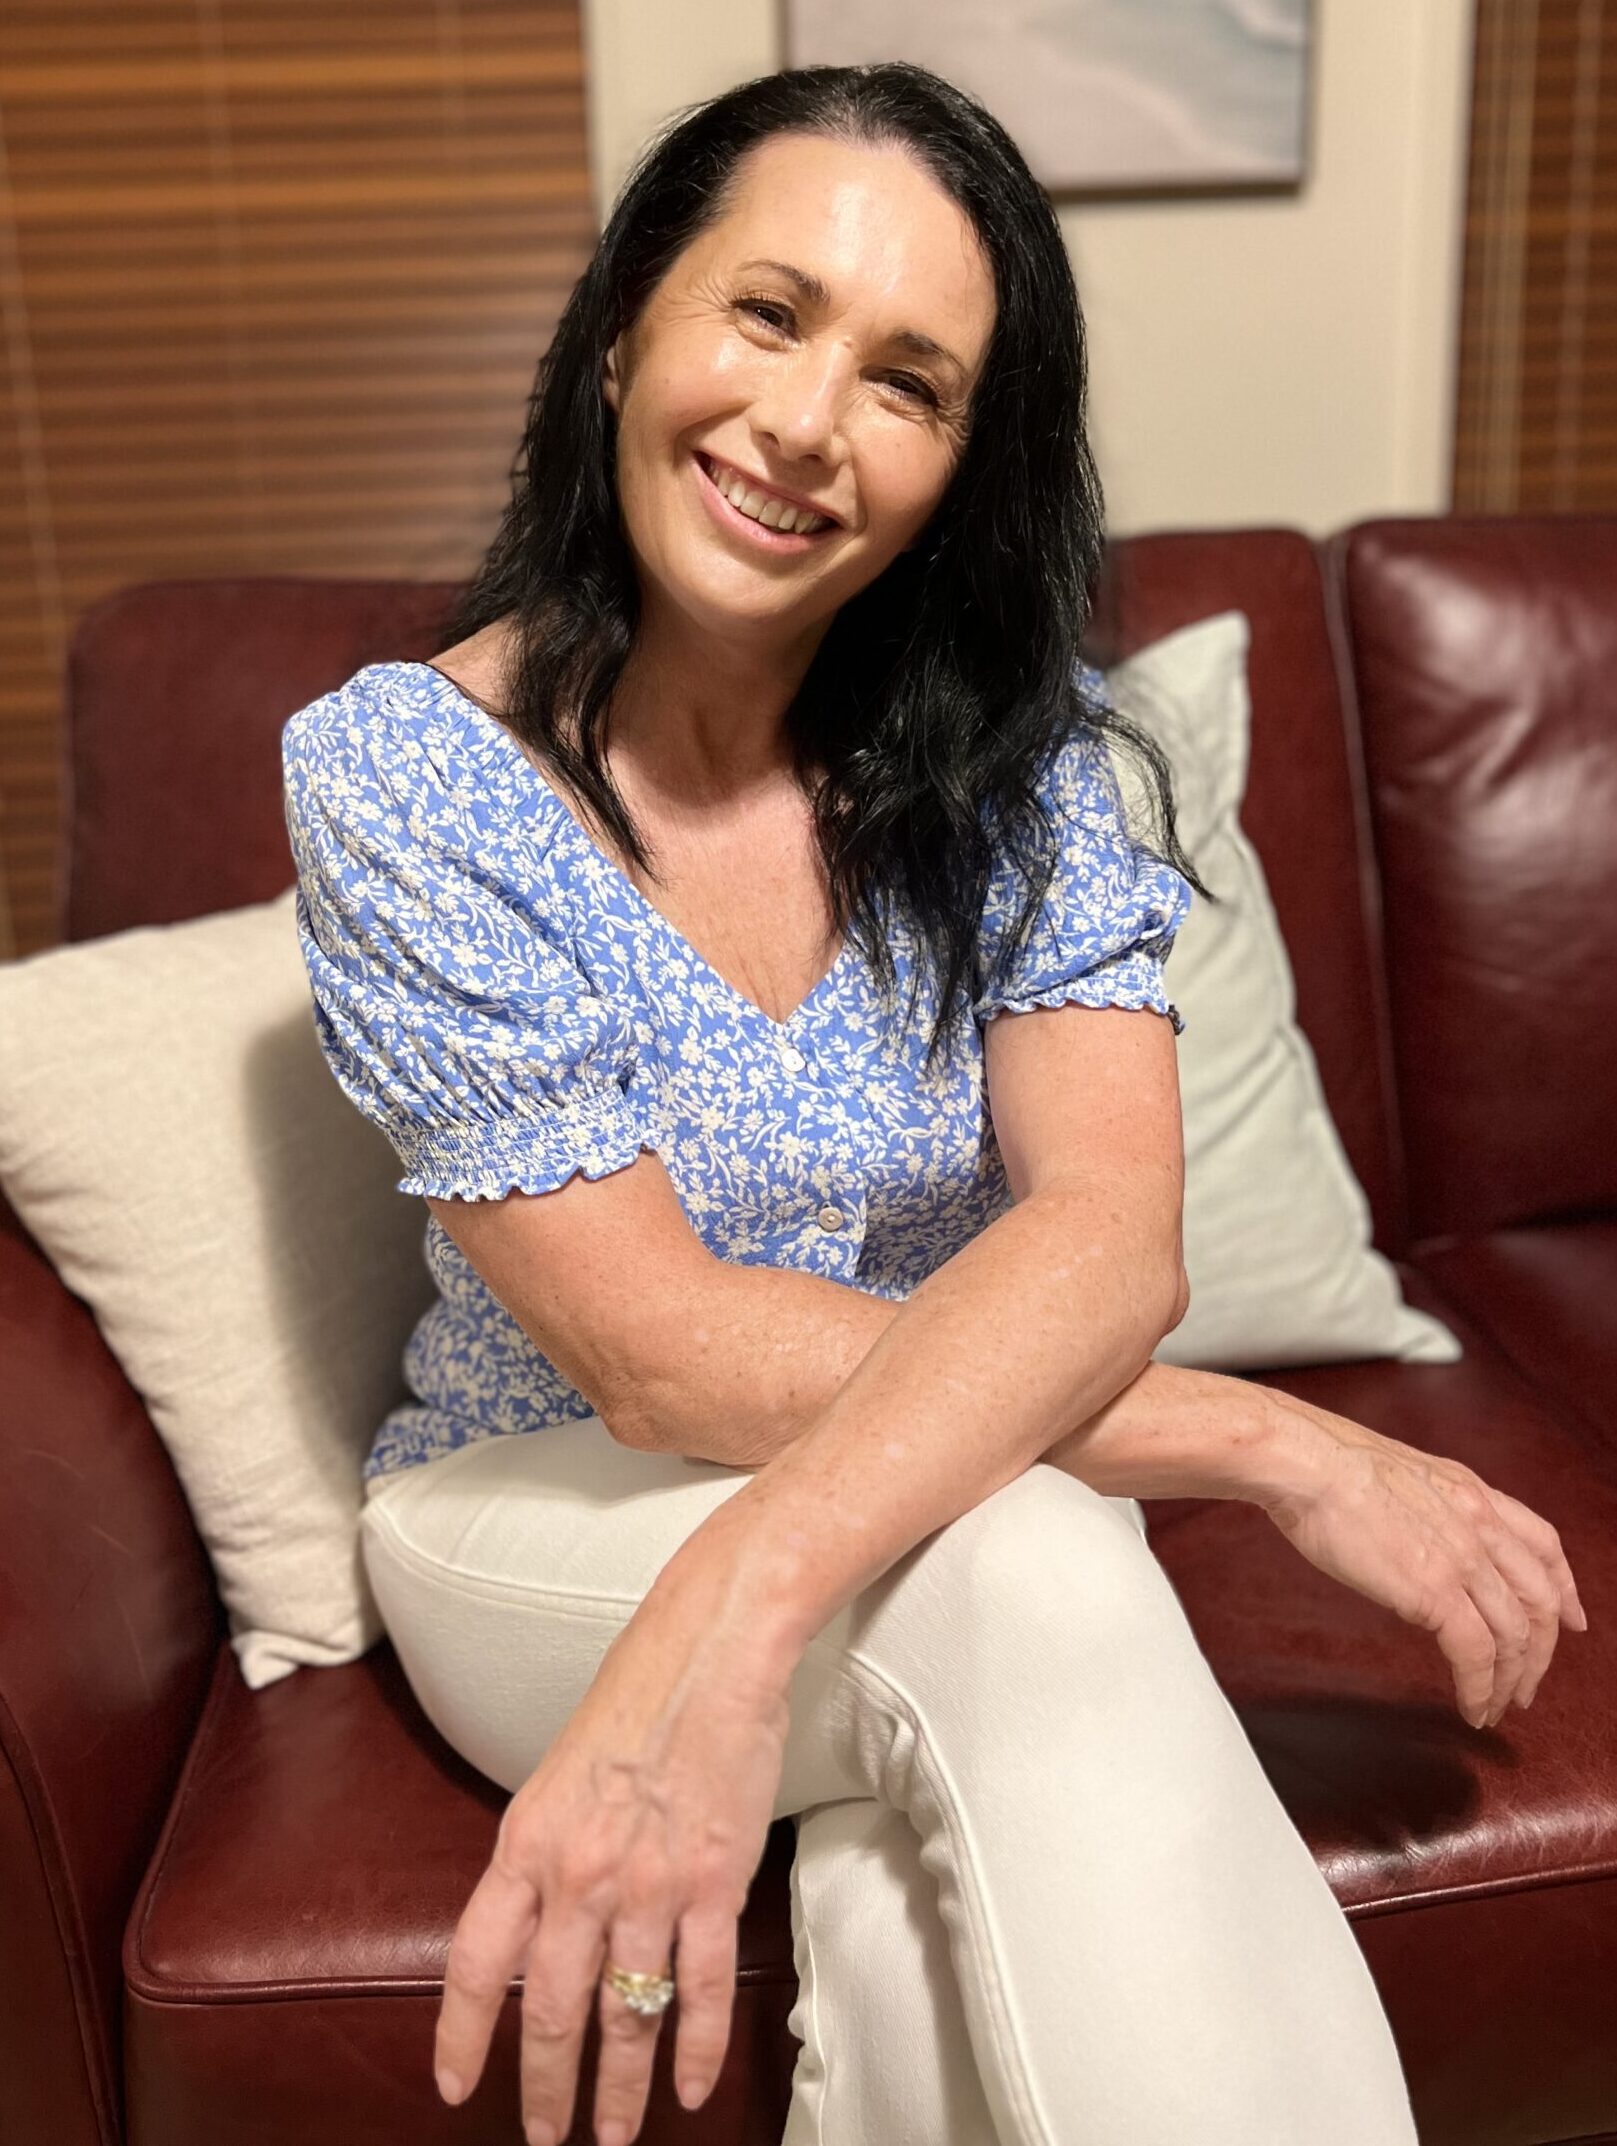 Portrait of Amanda Hefez smiling, the author of 'The In Sync Method', seated in a cozy office setting, symbolizing a warm and welcoming approach to psychological well-being and personal growth